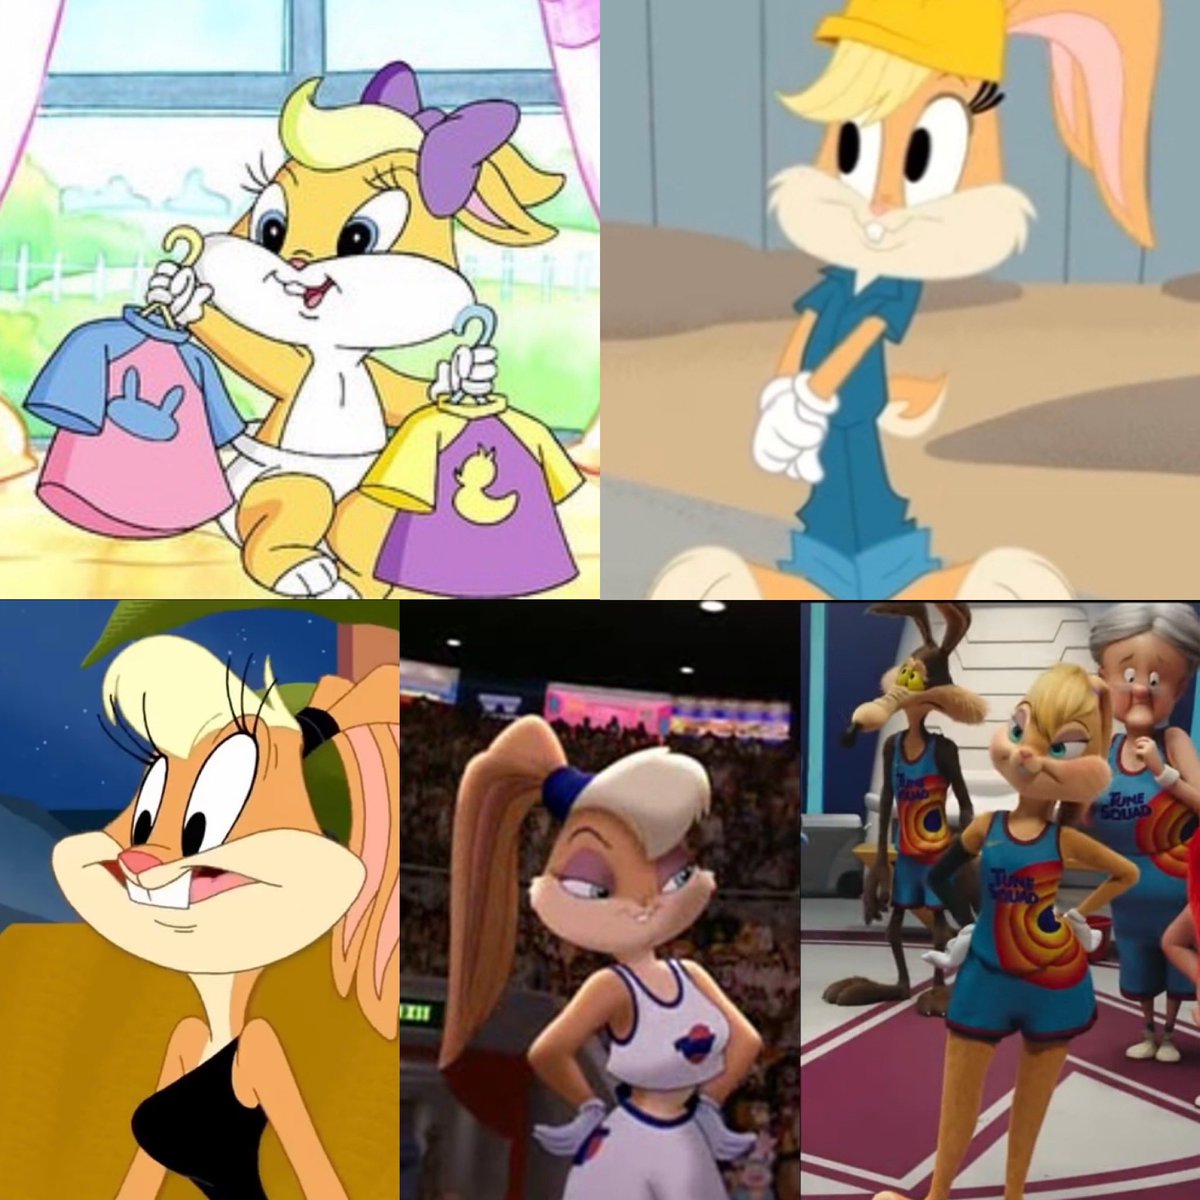 Lola Bunny is my all time favorite of the tunes ever. All the way since Baby Looney Tunes, Bugs Bunny Builders, TLTS, Space Jam 1-2. (Lola Bunny’s official timeline). (1991-2022 present) (birthday 10/14/88) @Zendaya @ChandniParekh_ @LooneyTunes @spacejammovie